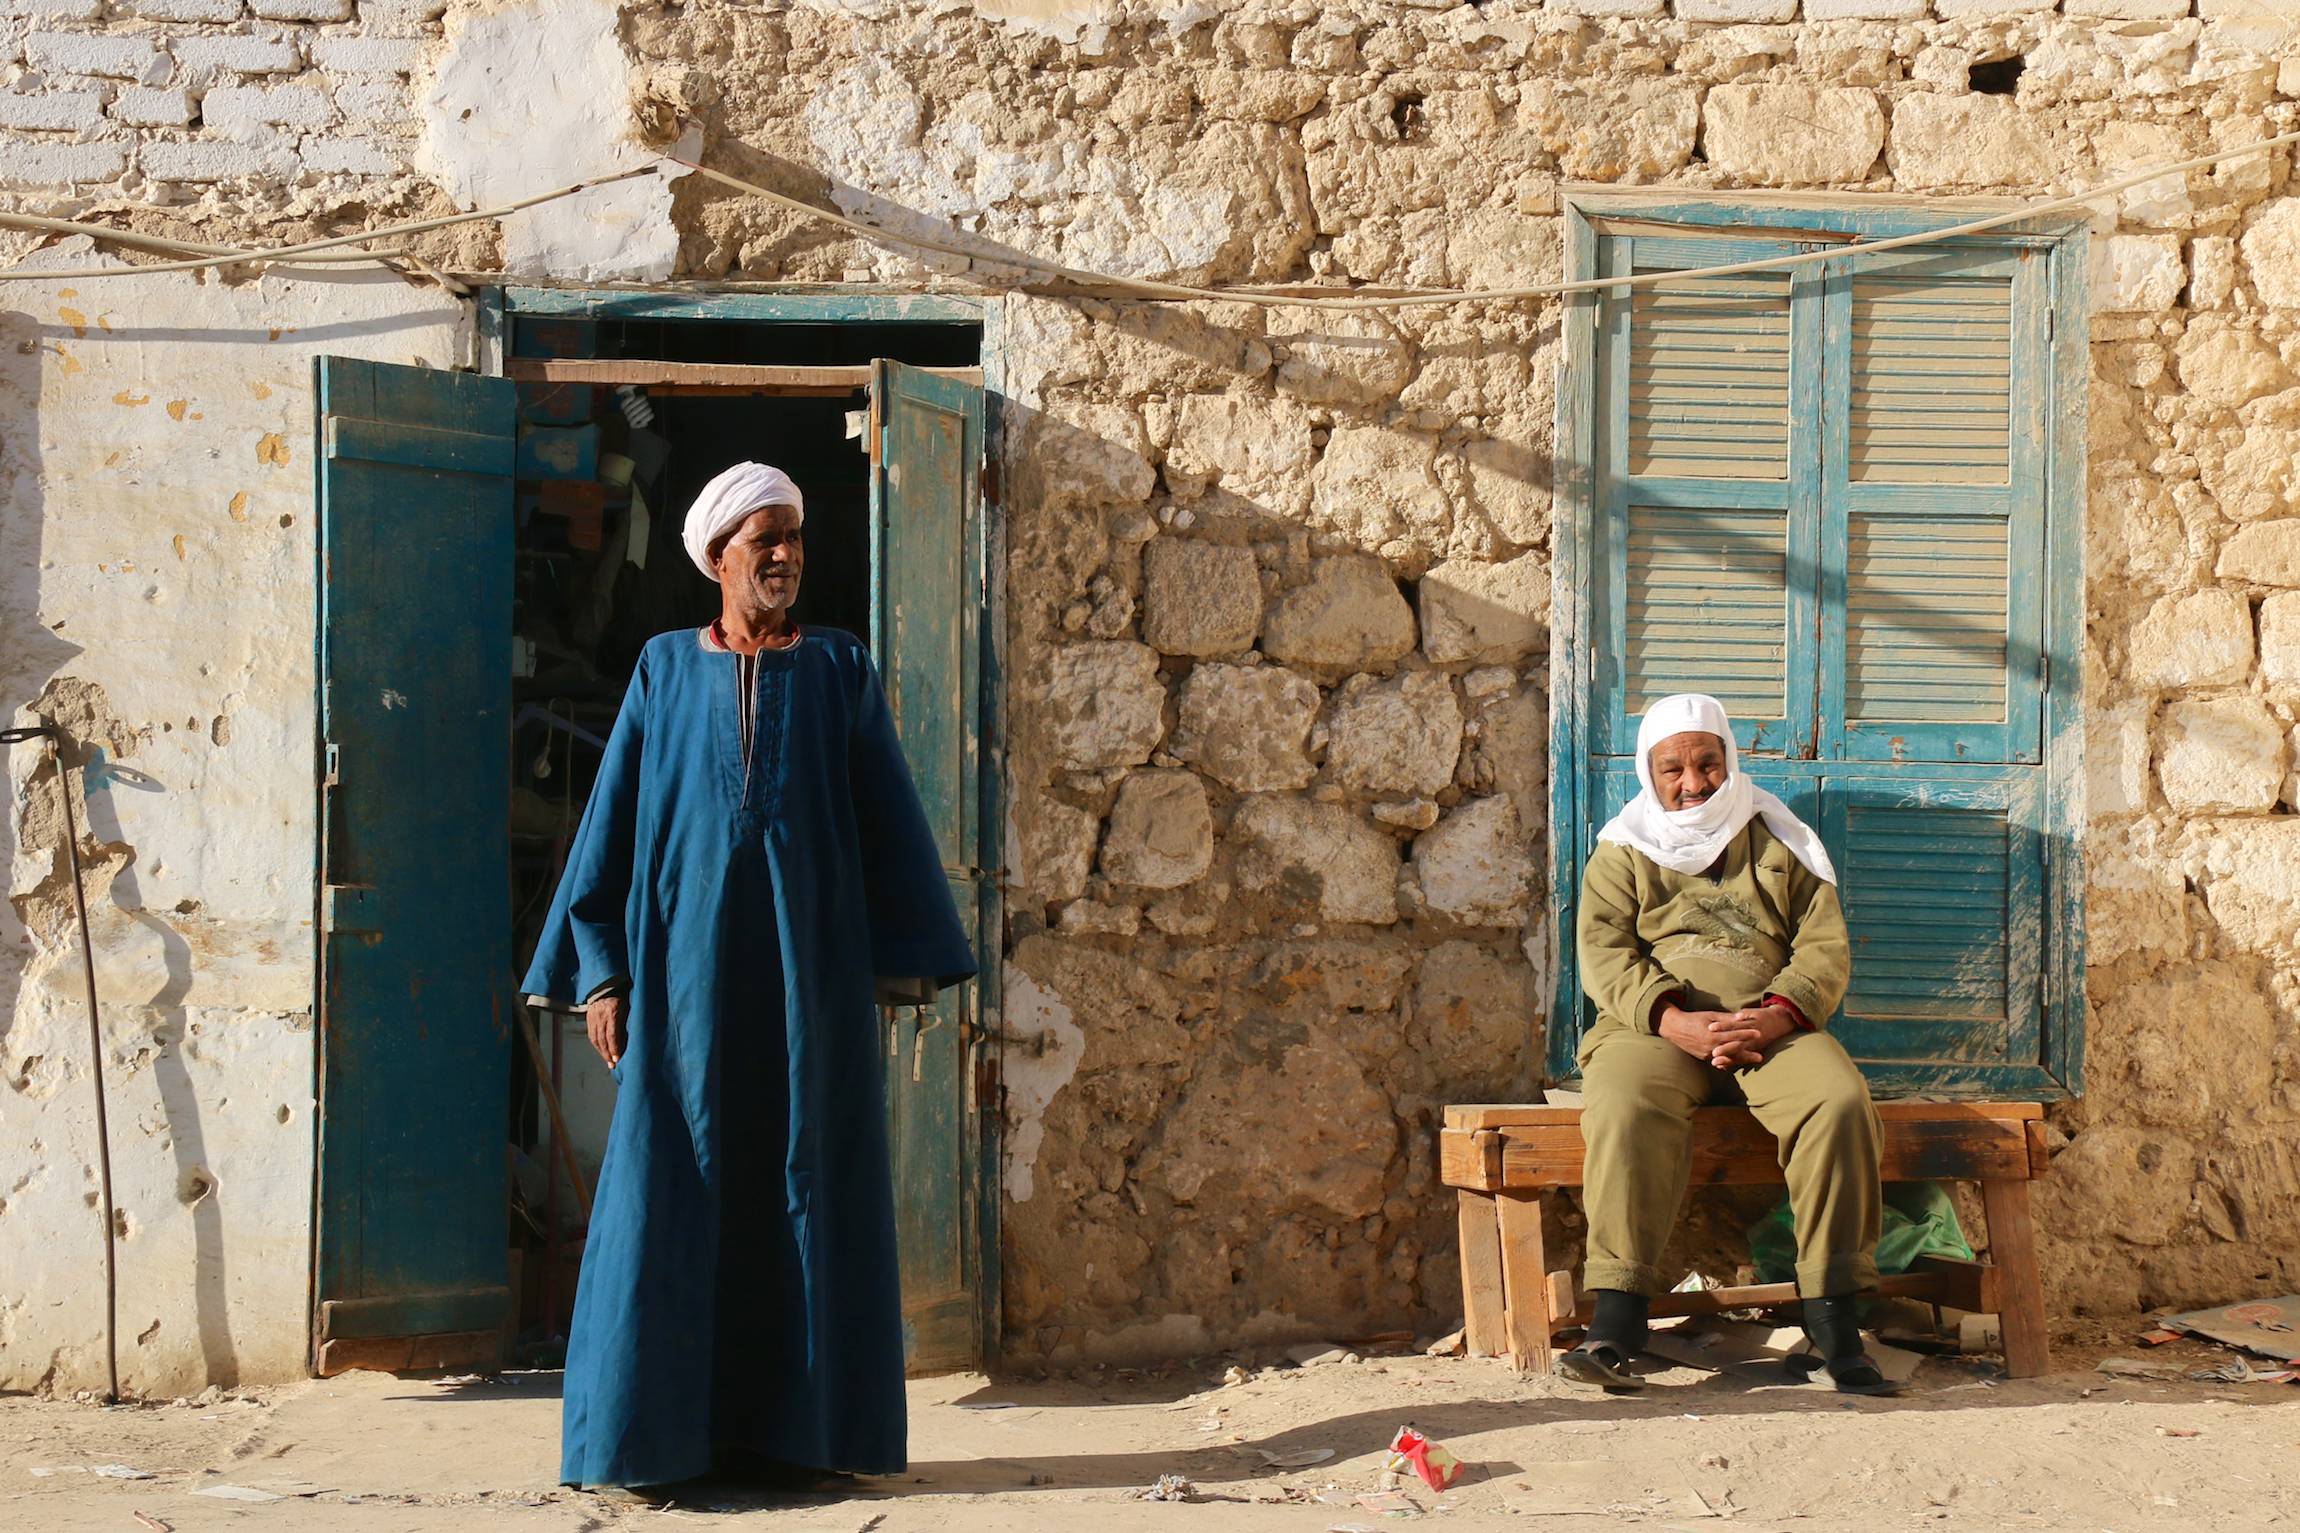 Men stand and sit in front of a house in El Quseir, Egypt, Jan. 8, 2014.